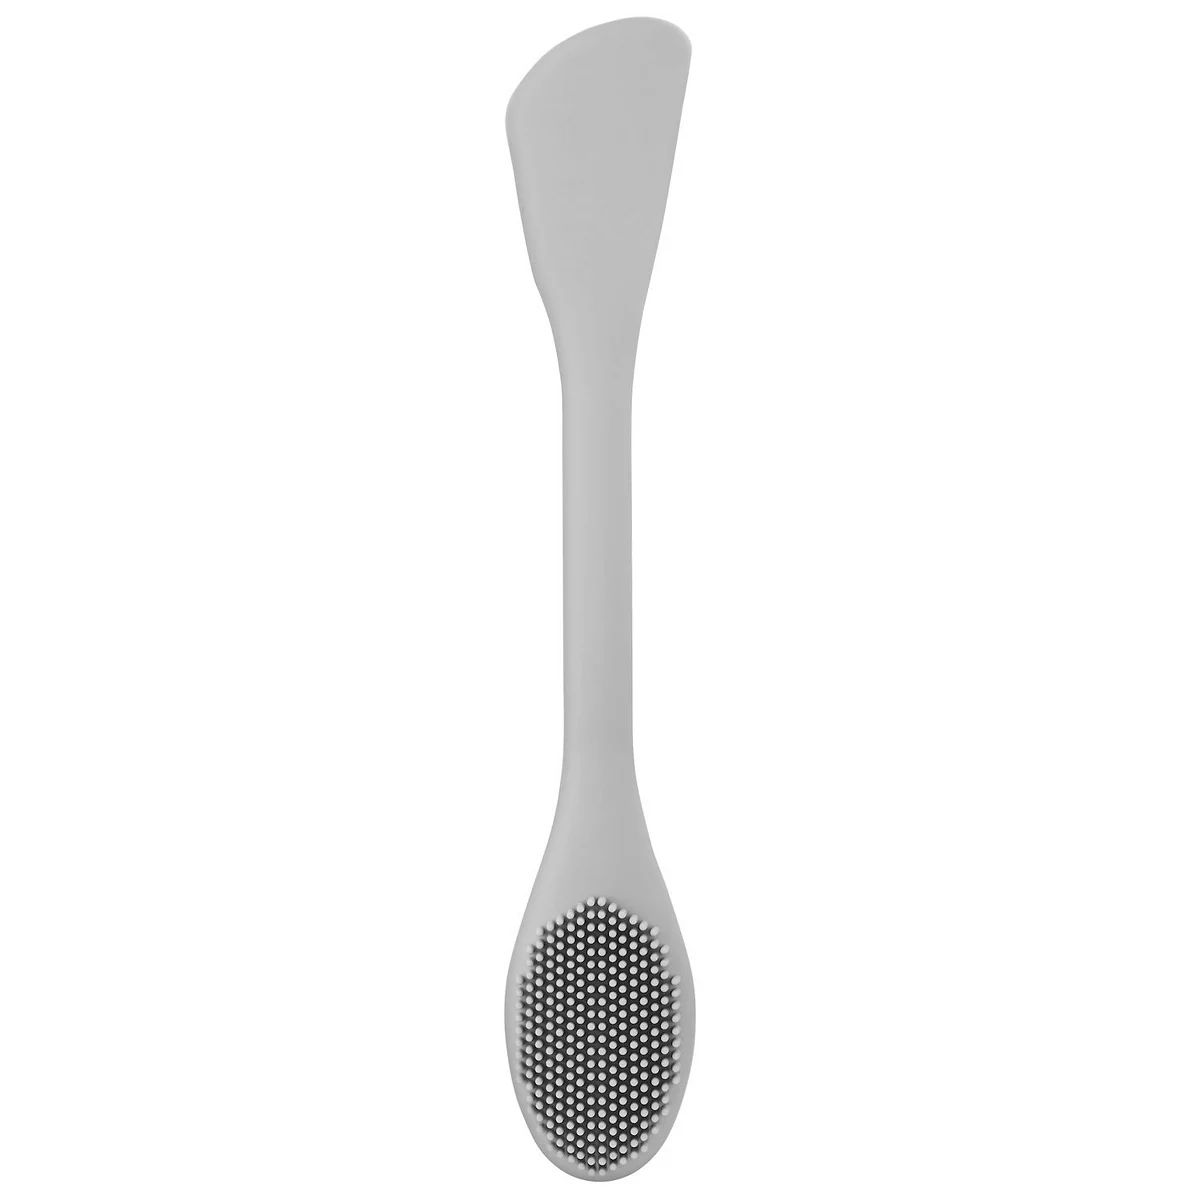 SEPHORA COLLECTION Face Mask Applicator | Kohl's